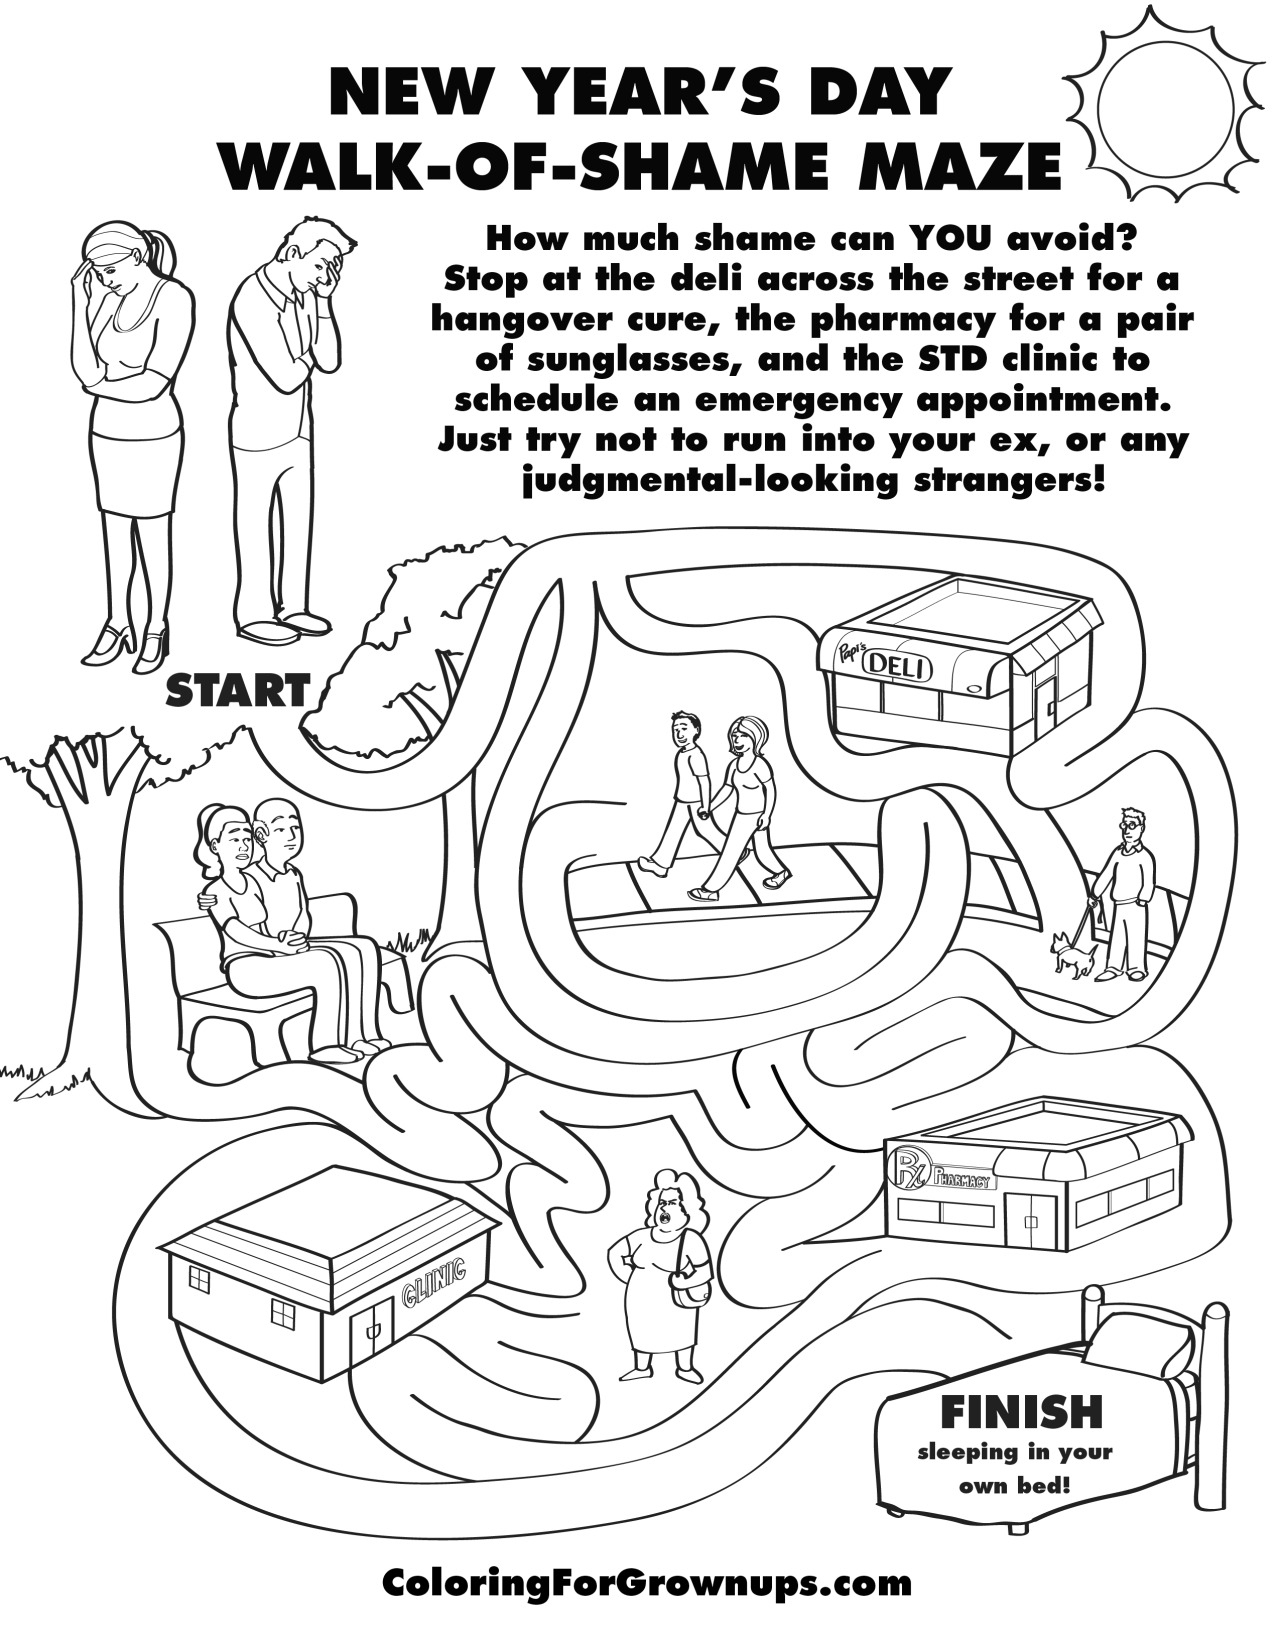 coloringforgrownups:  New Year’s Day Walk-of-Shame Maze-Enjoy a full year’s worth